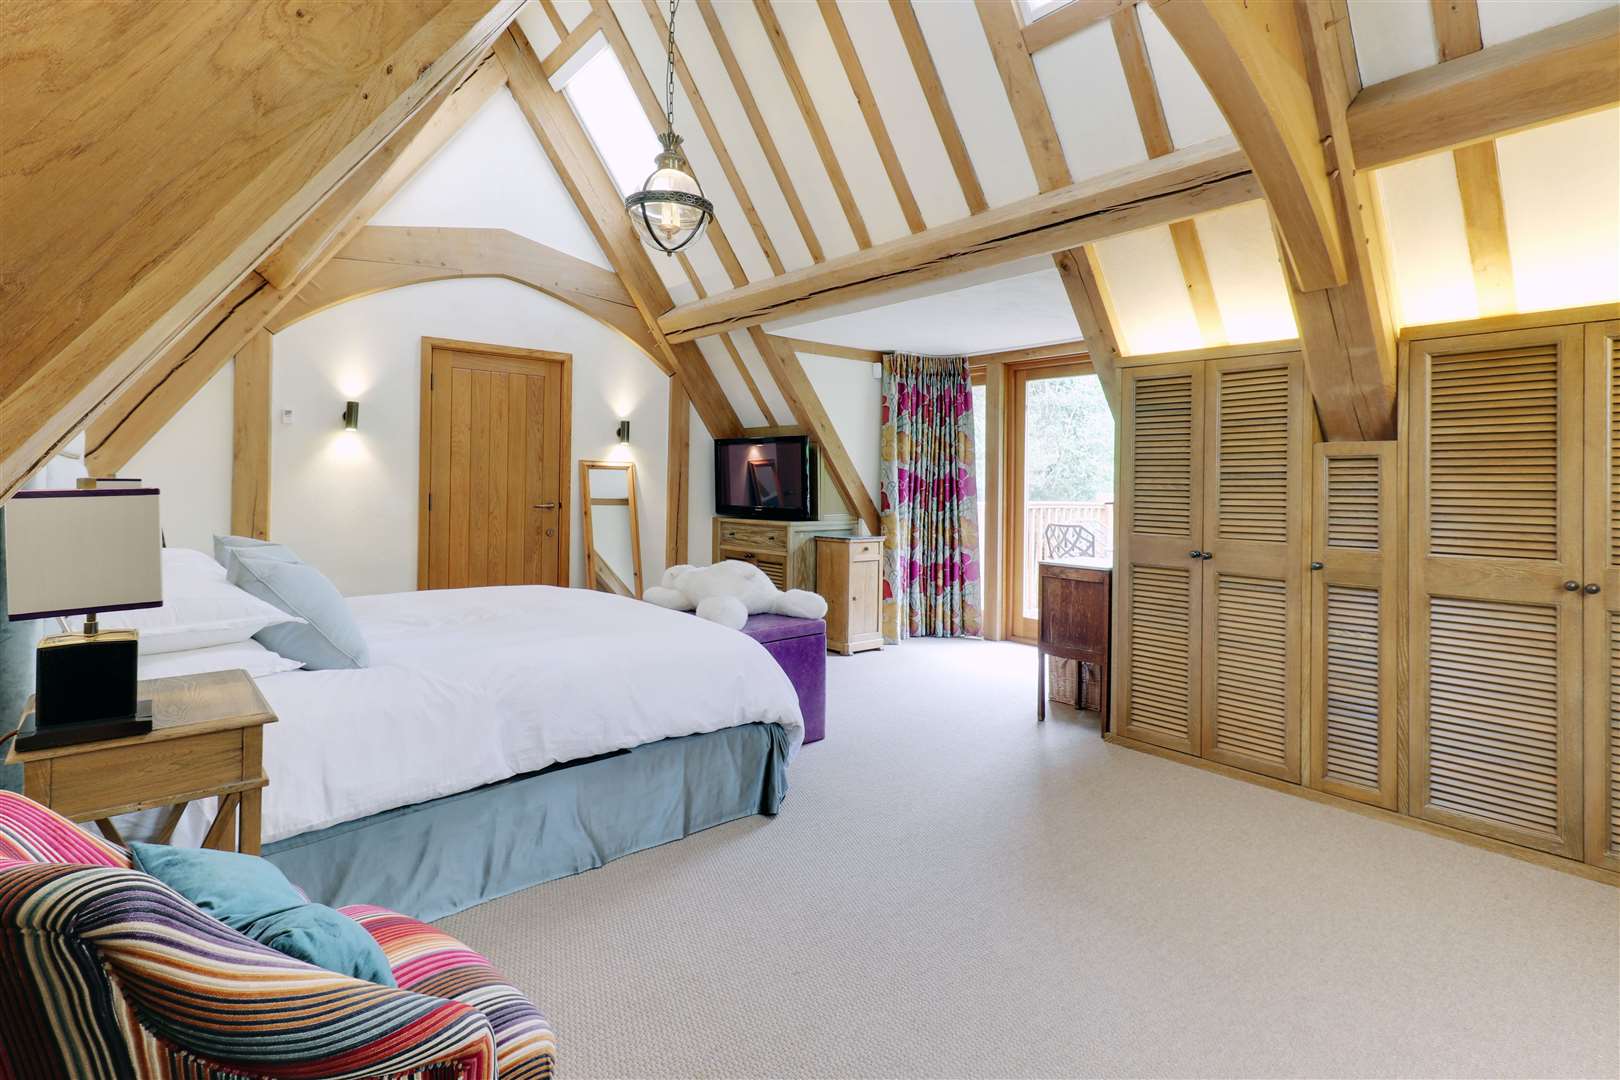 There are four spacious bedrooms inside the property. Picture: Savills